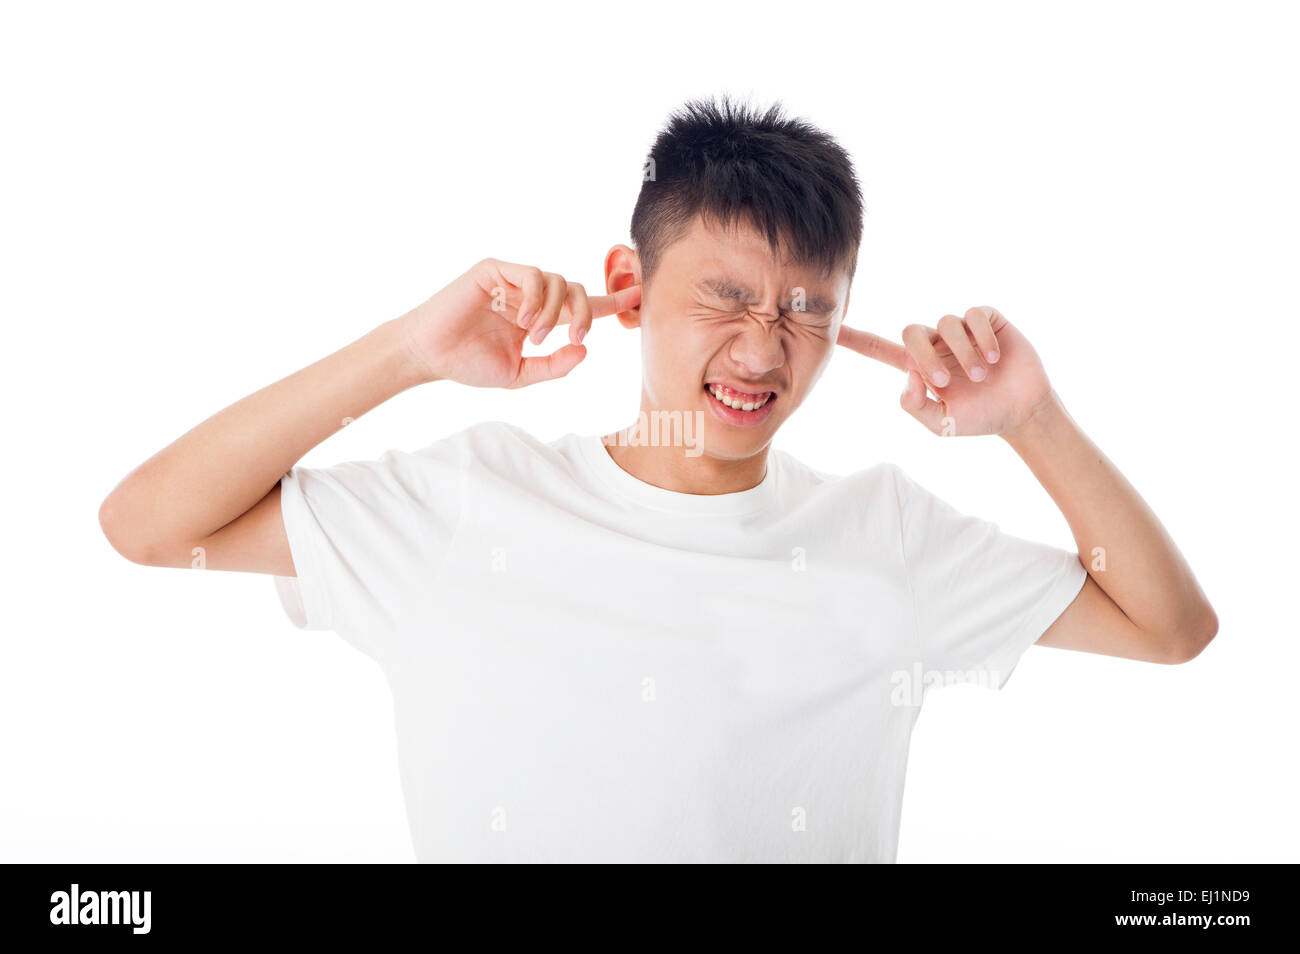 Teenage boy gesturing with facial expression Stock Photo